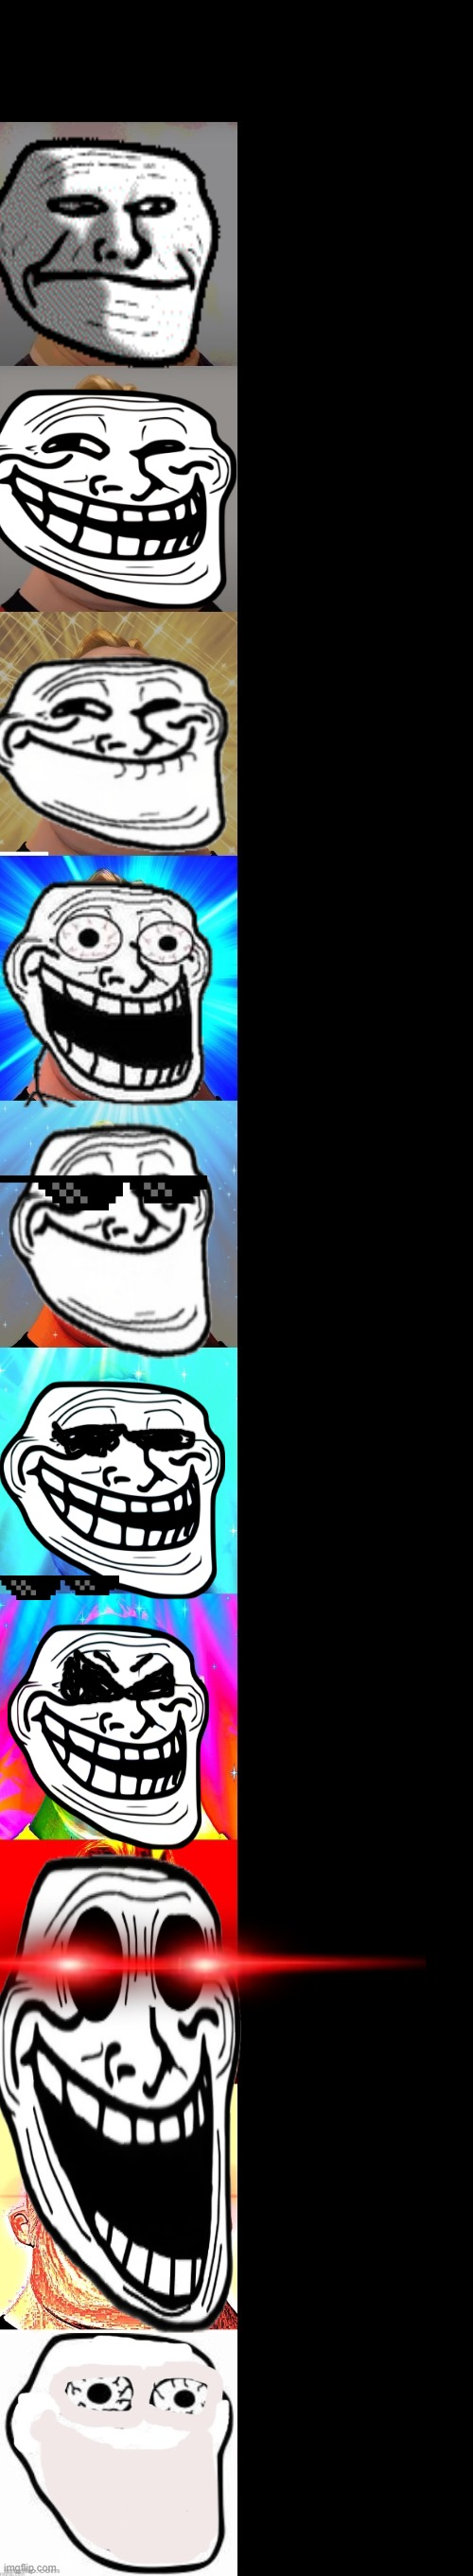 trollface becoming canny Blank Meme Template